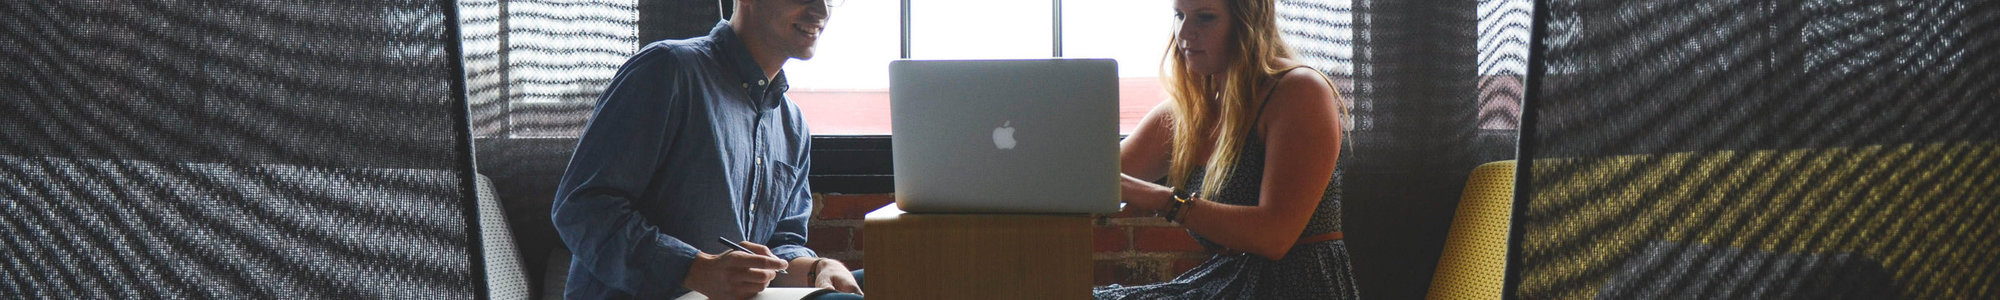 Rsz Canva   Smiling Man And Woman Both Sitting On Sofa Both Looking At Silver Macbook